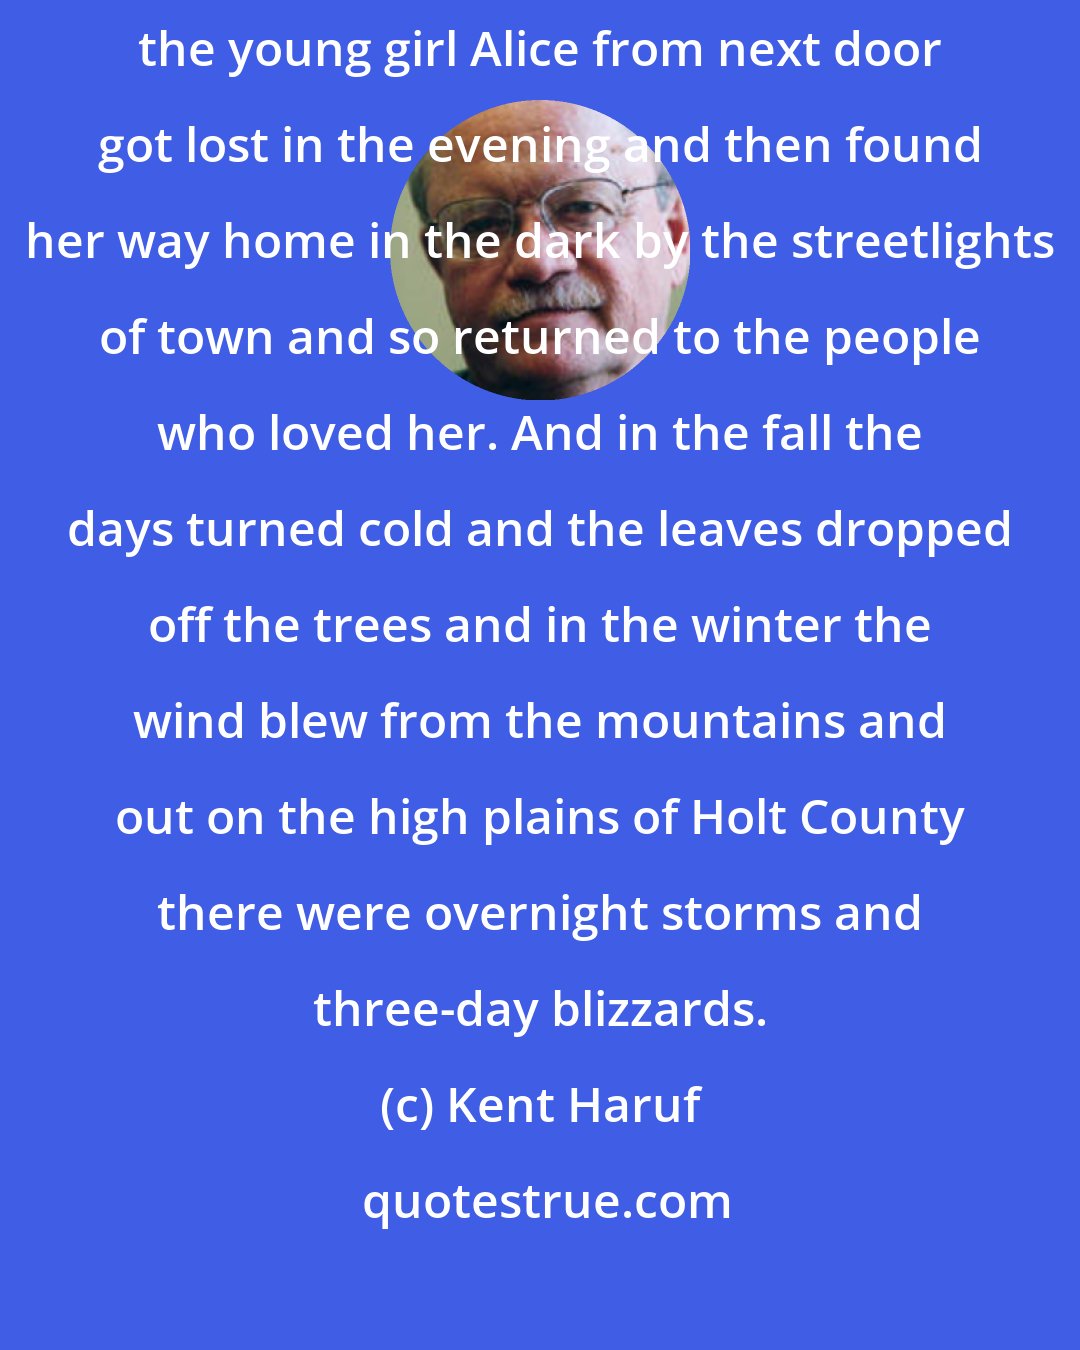 Kent Haruf: That was on a night in August. Dad Lewis died early that morning and the young girl Alice from next door got lost in the evening and then found her way home in the dark by the streetlights of town and so returned to the people who loved her. And in the fall the days turned cold and the leaves dropped off the trees and in the winter the wind blew from the mountains and out on the high plains of Holt County there were overnight storms and three-day blizzards.